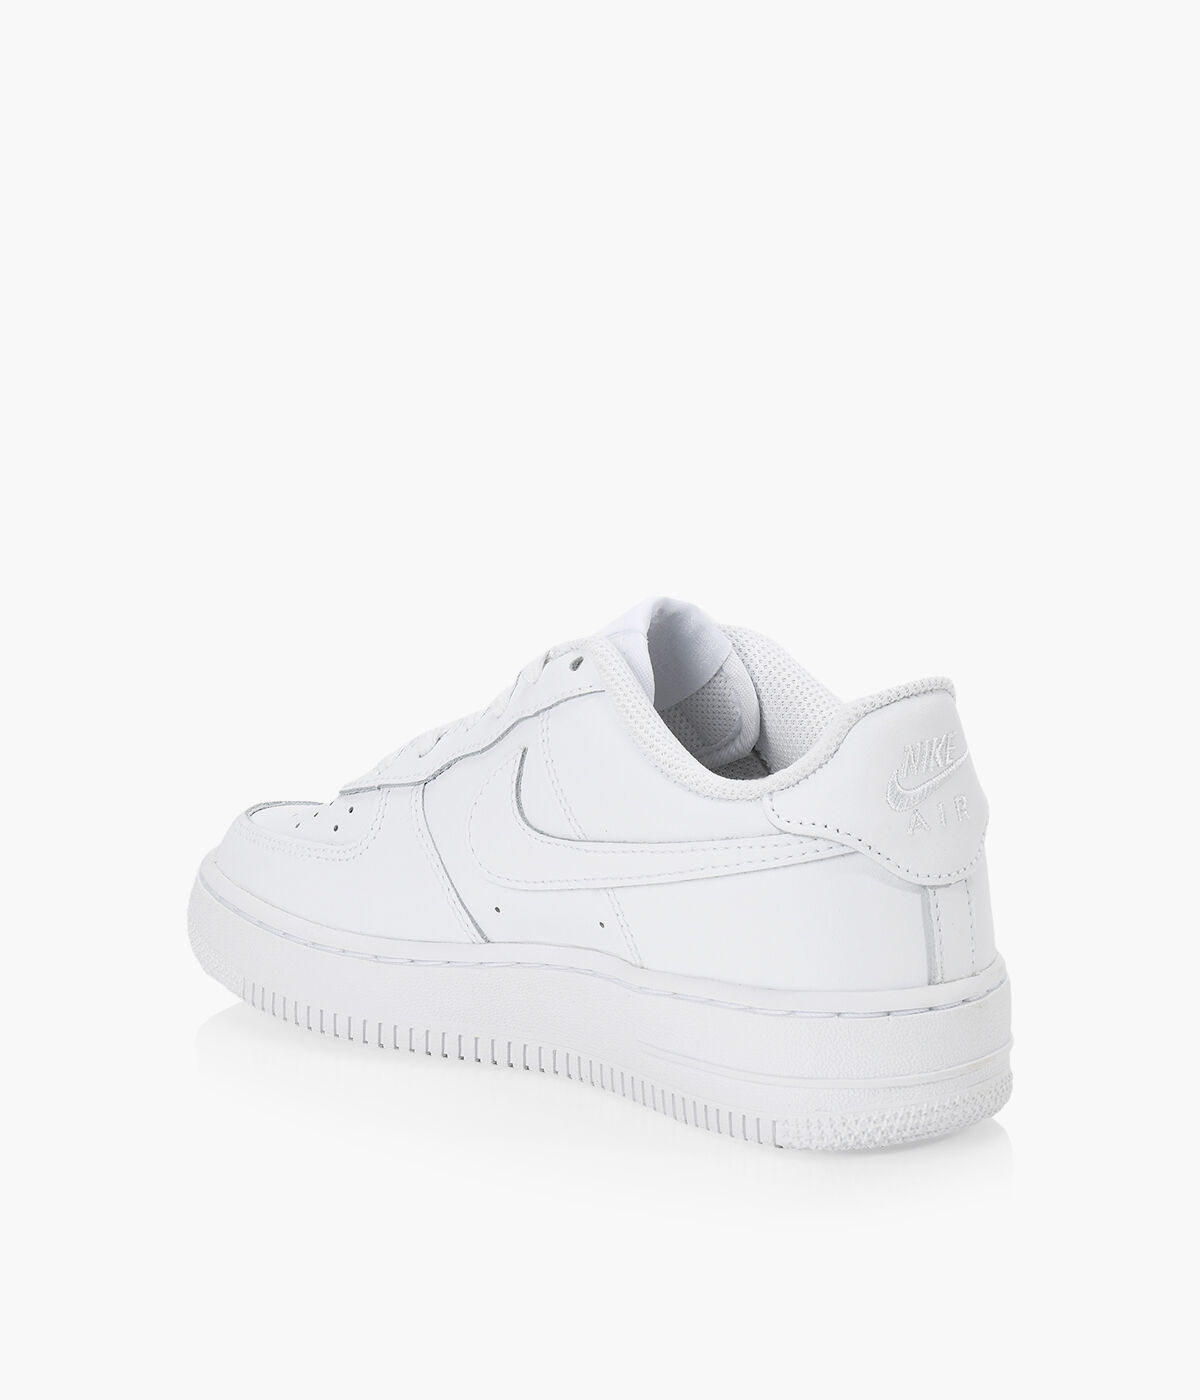 nike air force 1 infant size 9